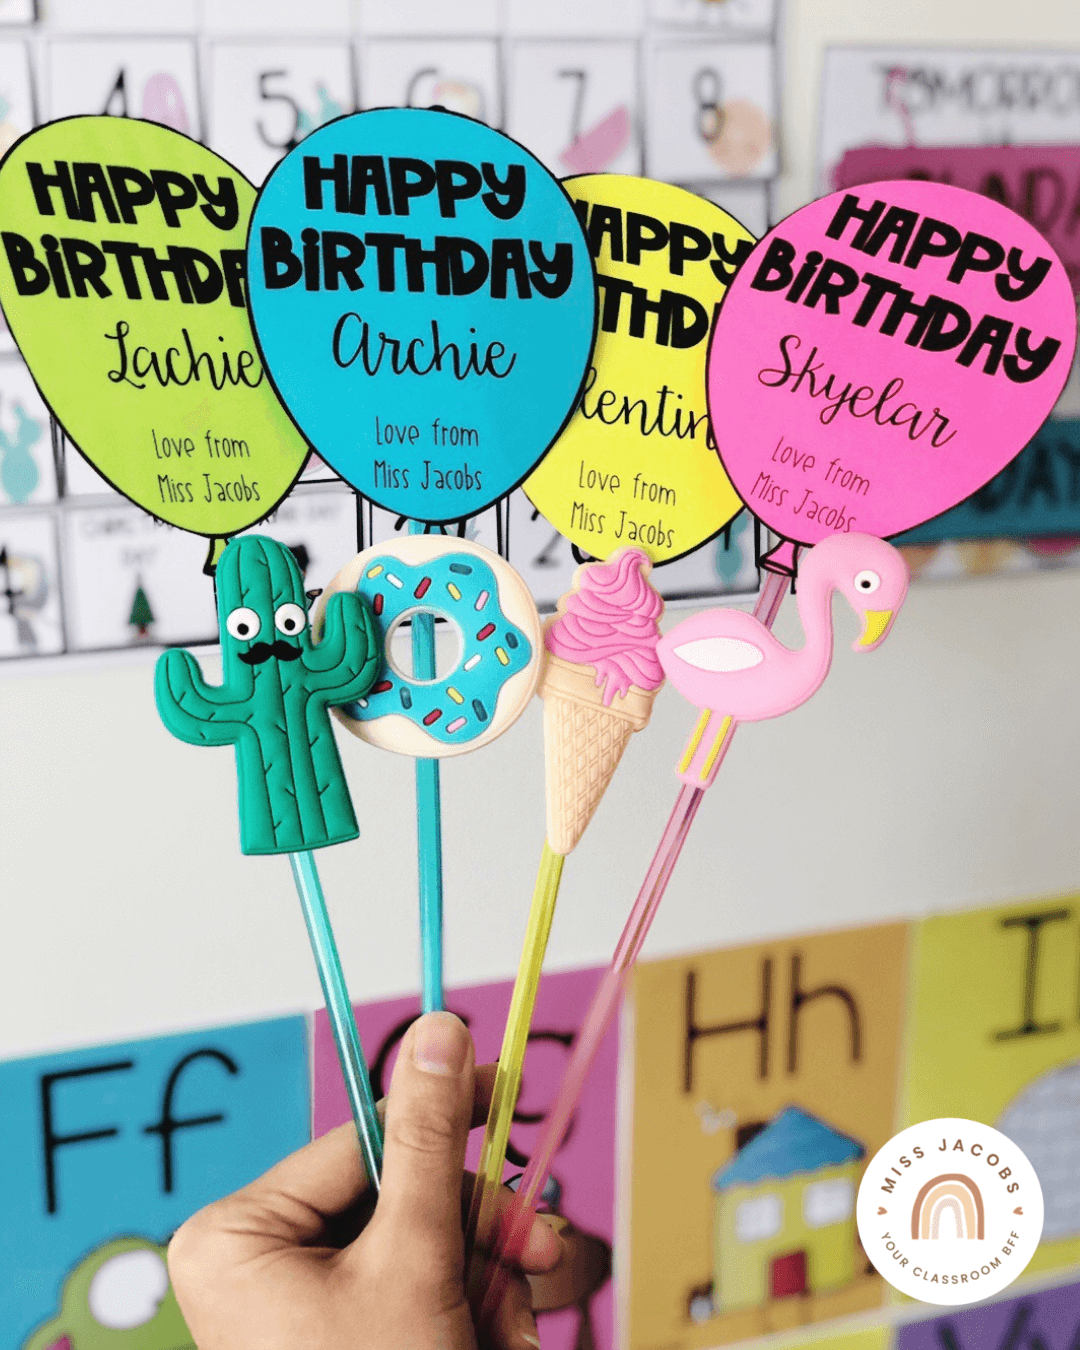 The left image shows a hand holding four straws with toppers in bright colours - we see a cactus, donut, icecream and flamingo. There’s coloured balloons that say ‘Happy Birthday’ as well as the students’ name and ‘Love from Miss Jacobs.’ The right image has the same balloon labels, but they’re affixed to bright flower shaped highlighters.” style=